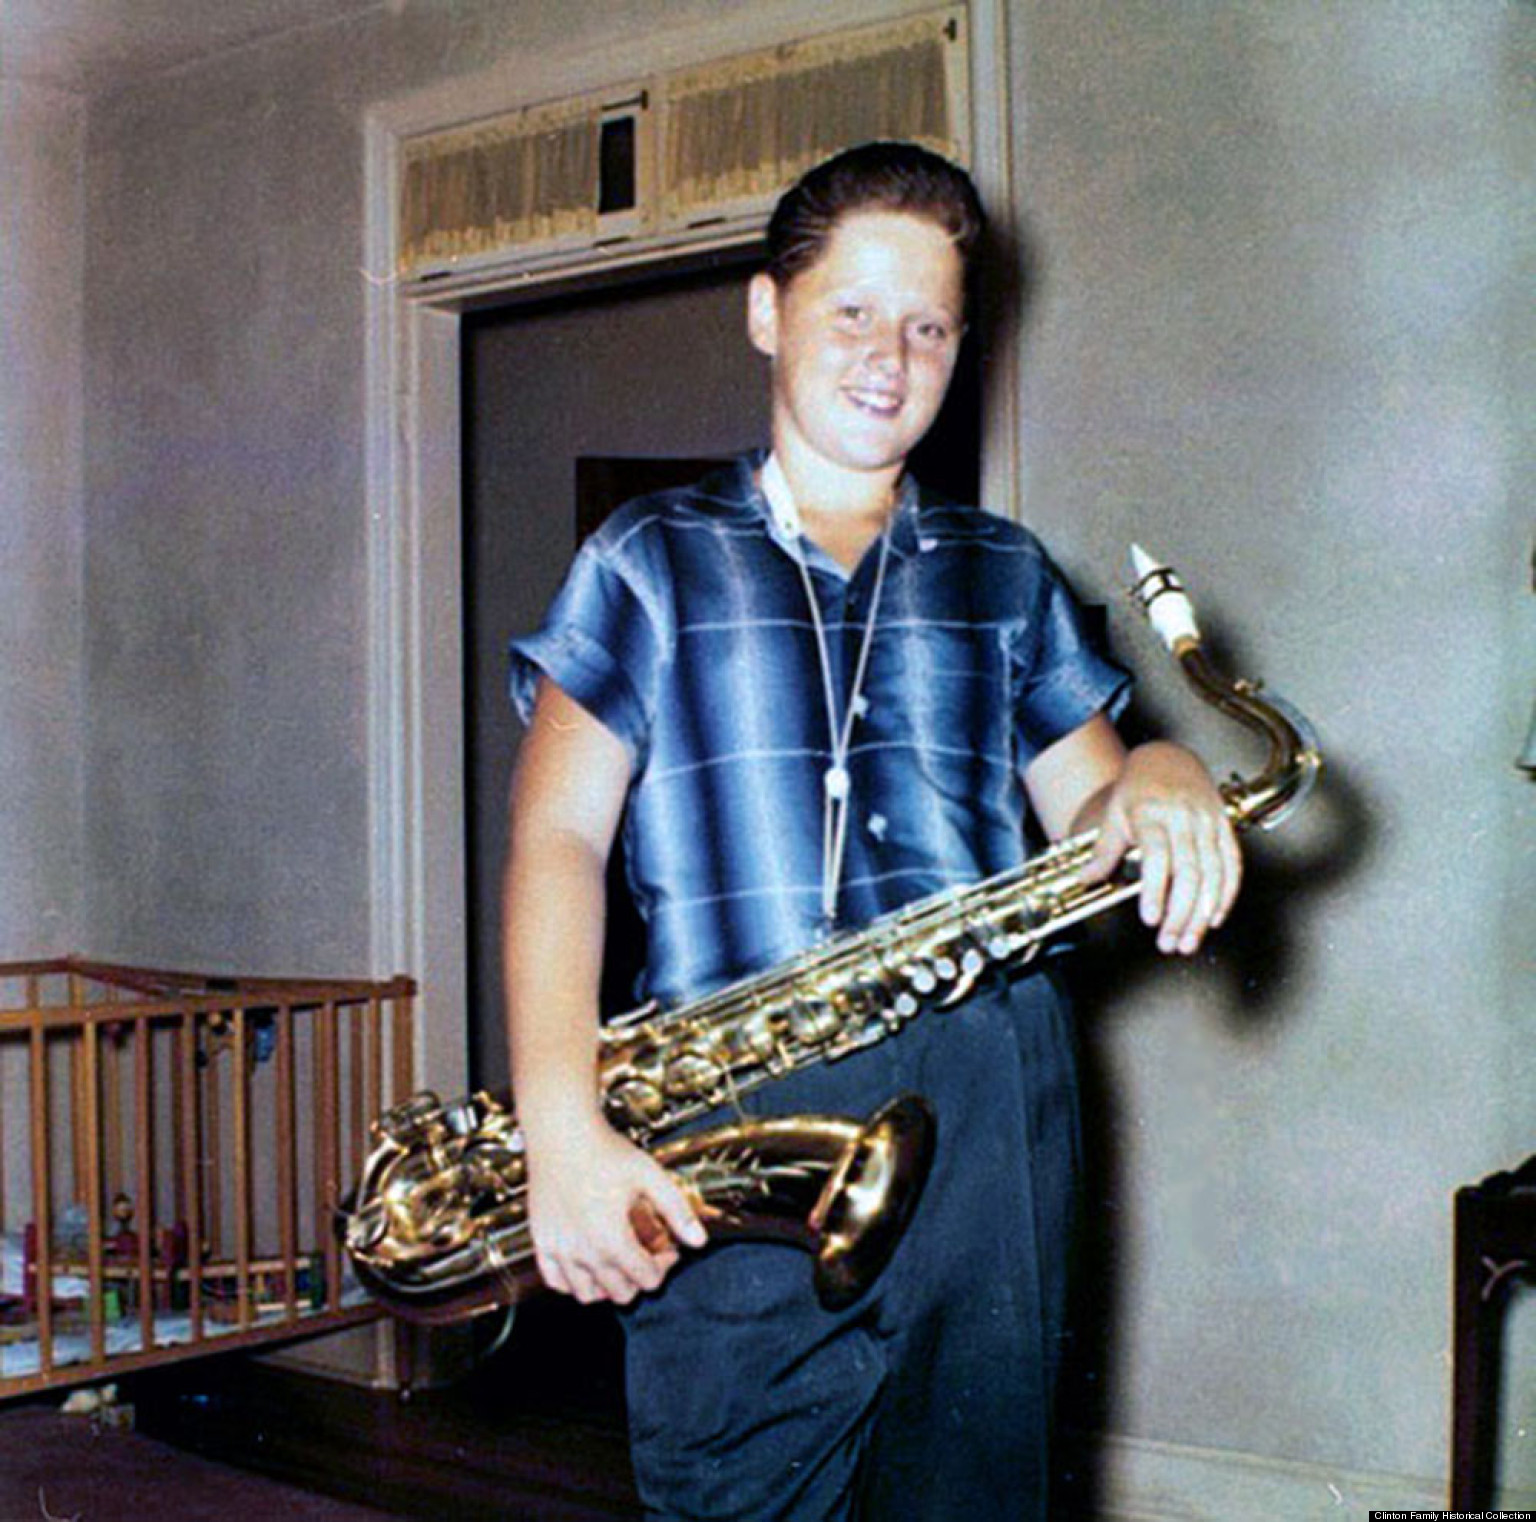 Young Bill Clinton Gets His Sax On (PHOTO)